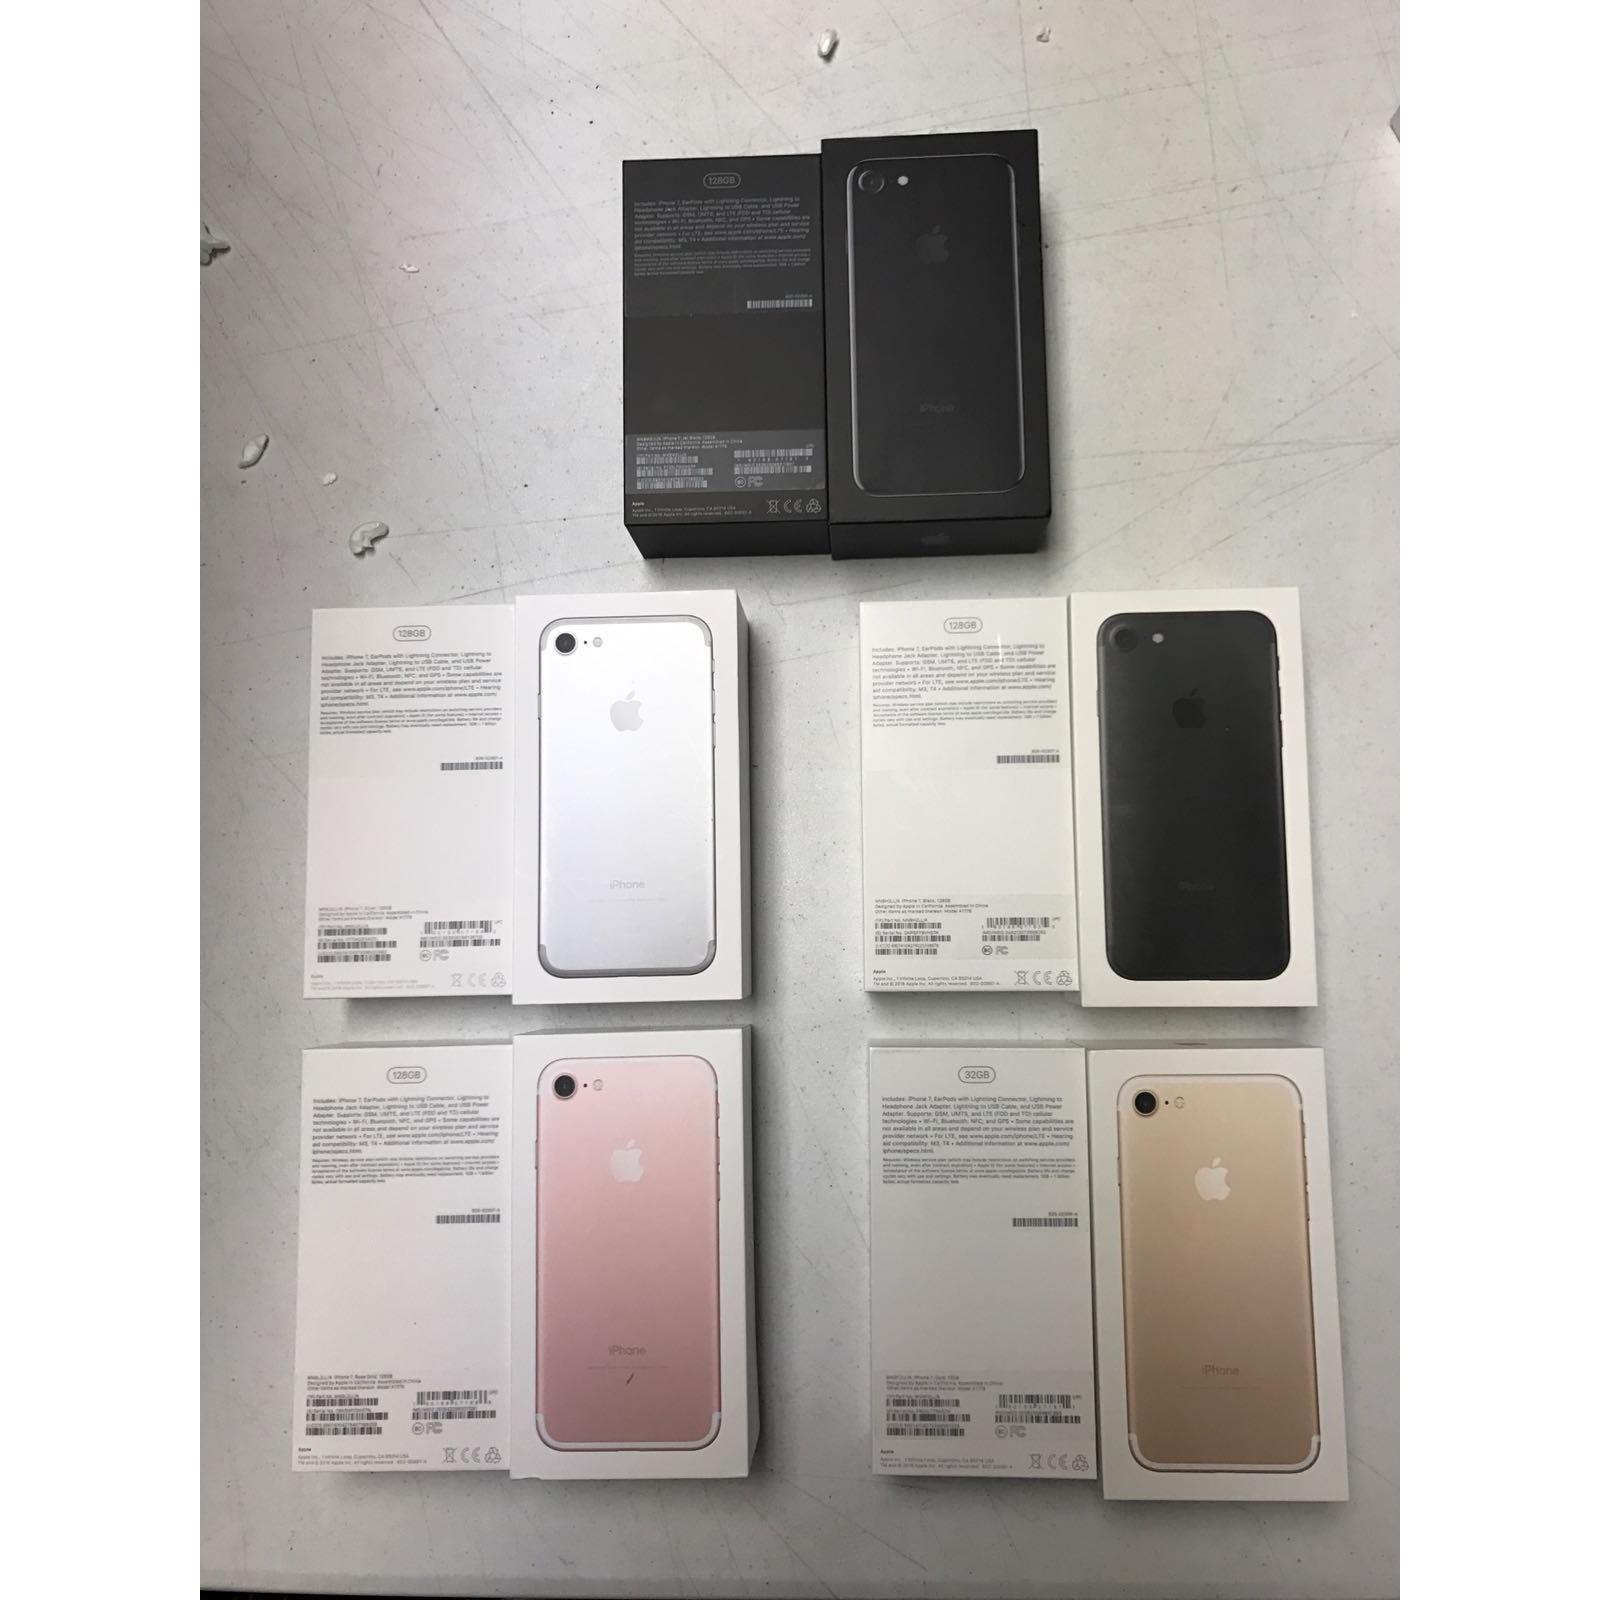 Apple Iphone 7 Boxes Wholesale Suppliers